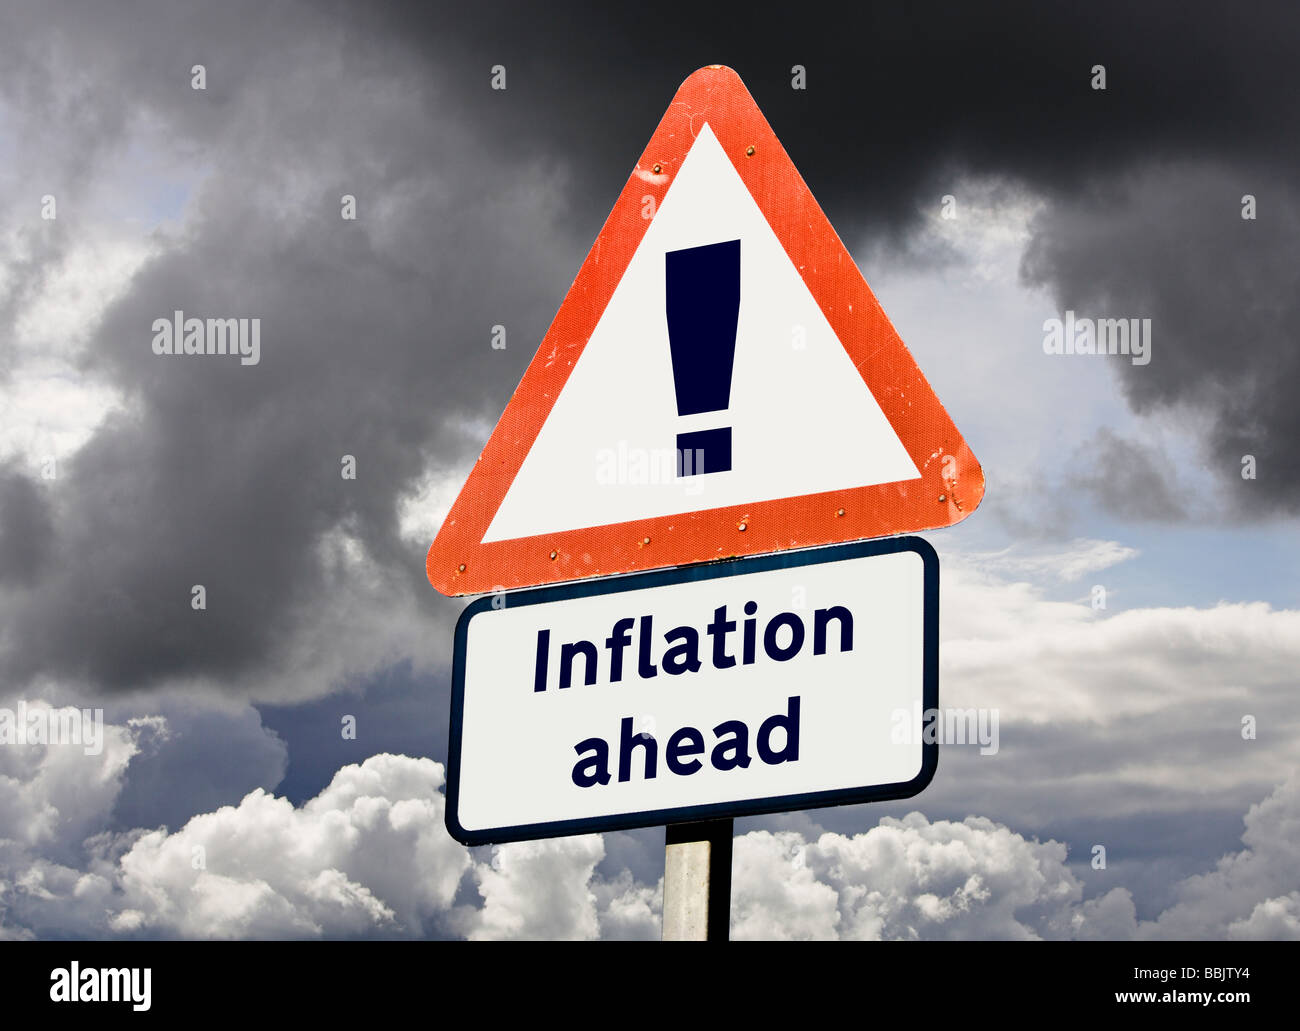 Sign concept showing Inflation Rising Ahead - future prediction, economy, economics concepts, UK Stock Photo